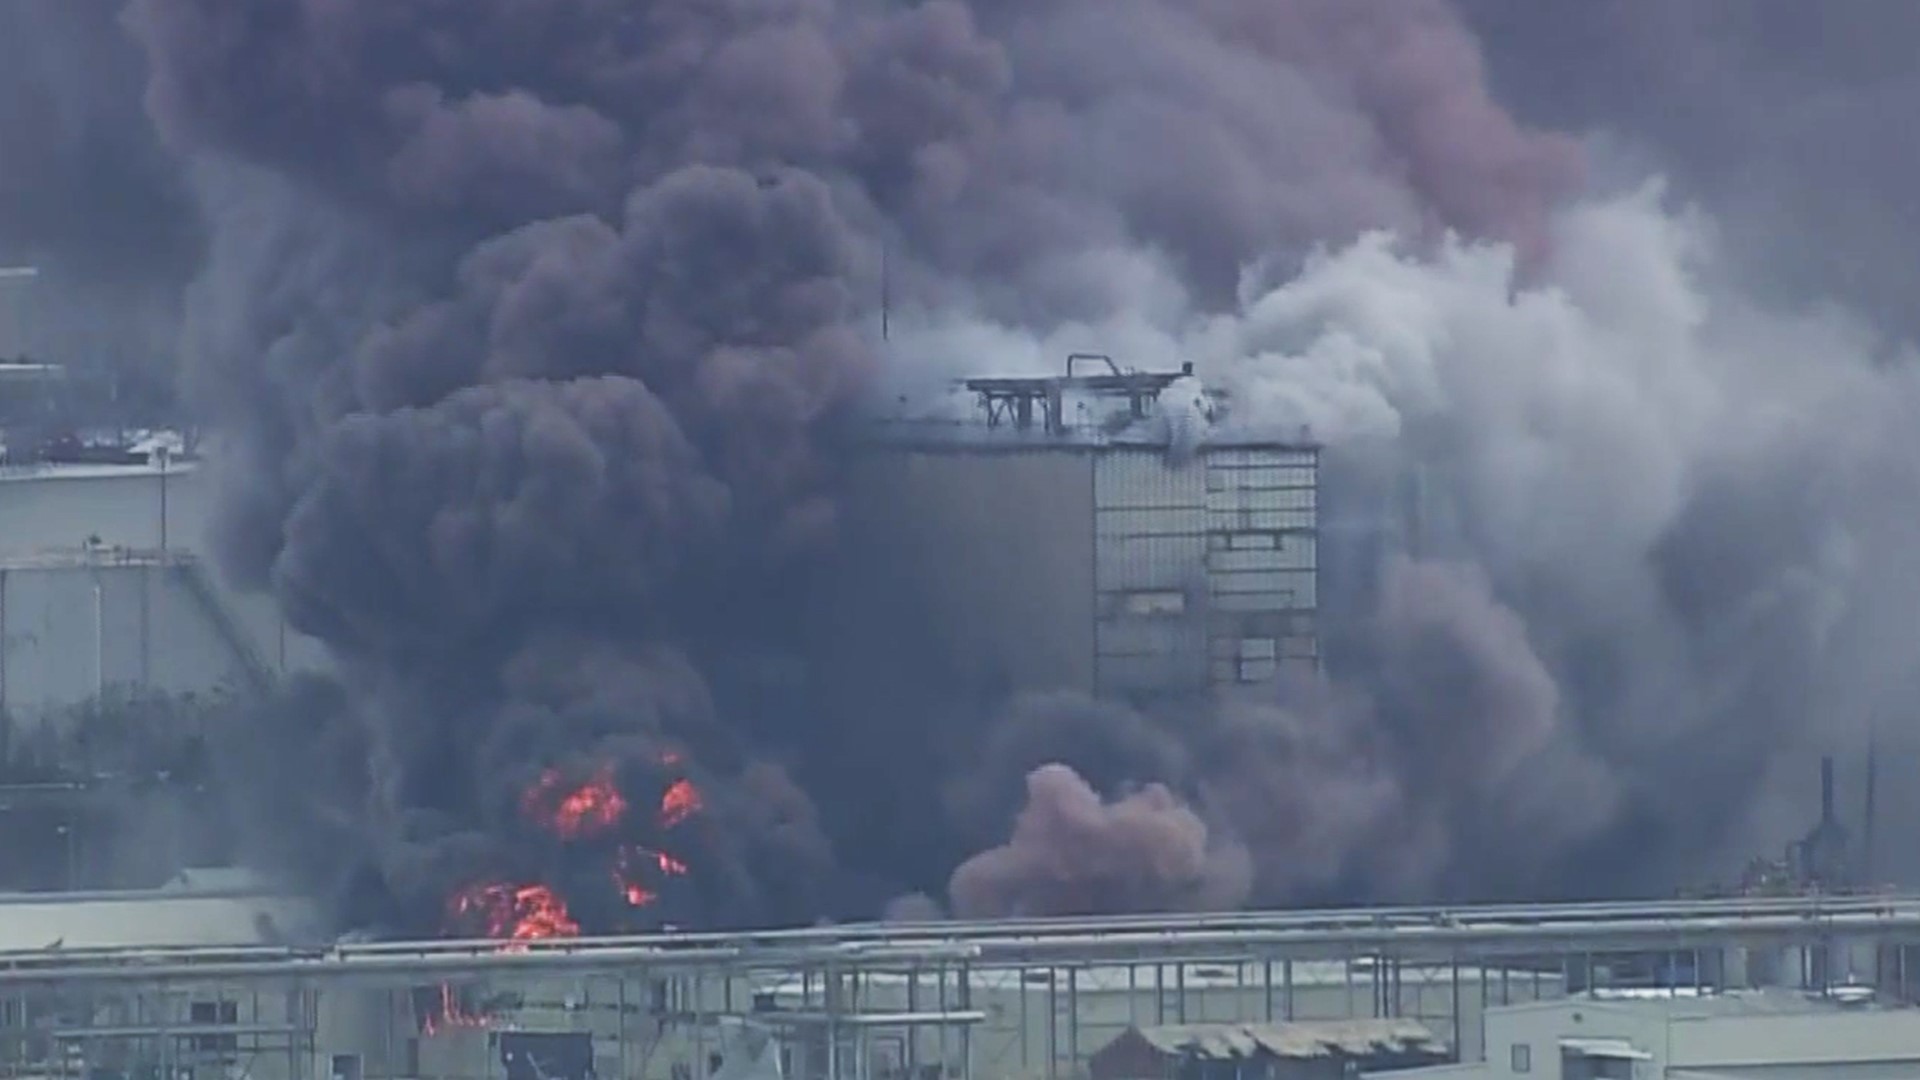 A large chemical plant fire has been reported along I-10 just west of Lake Charles, Louisiana officials warn. This is raw video from Air 11 / no audio.